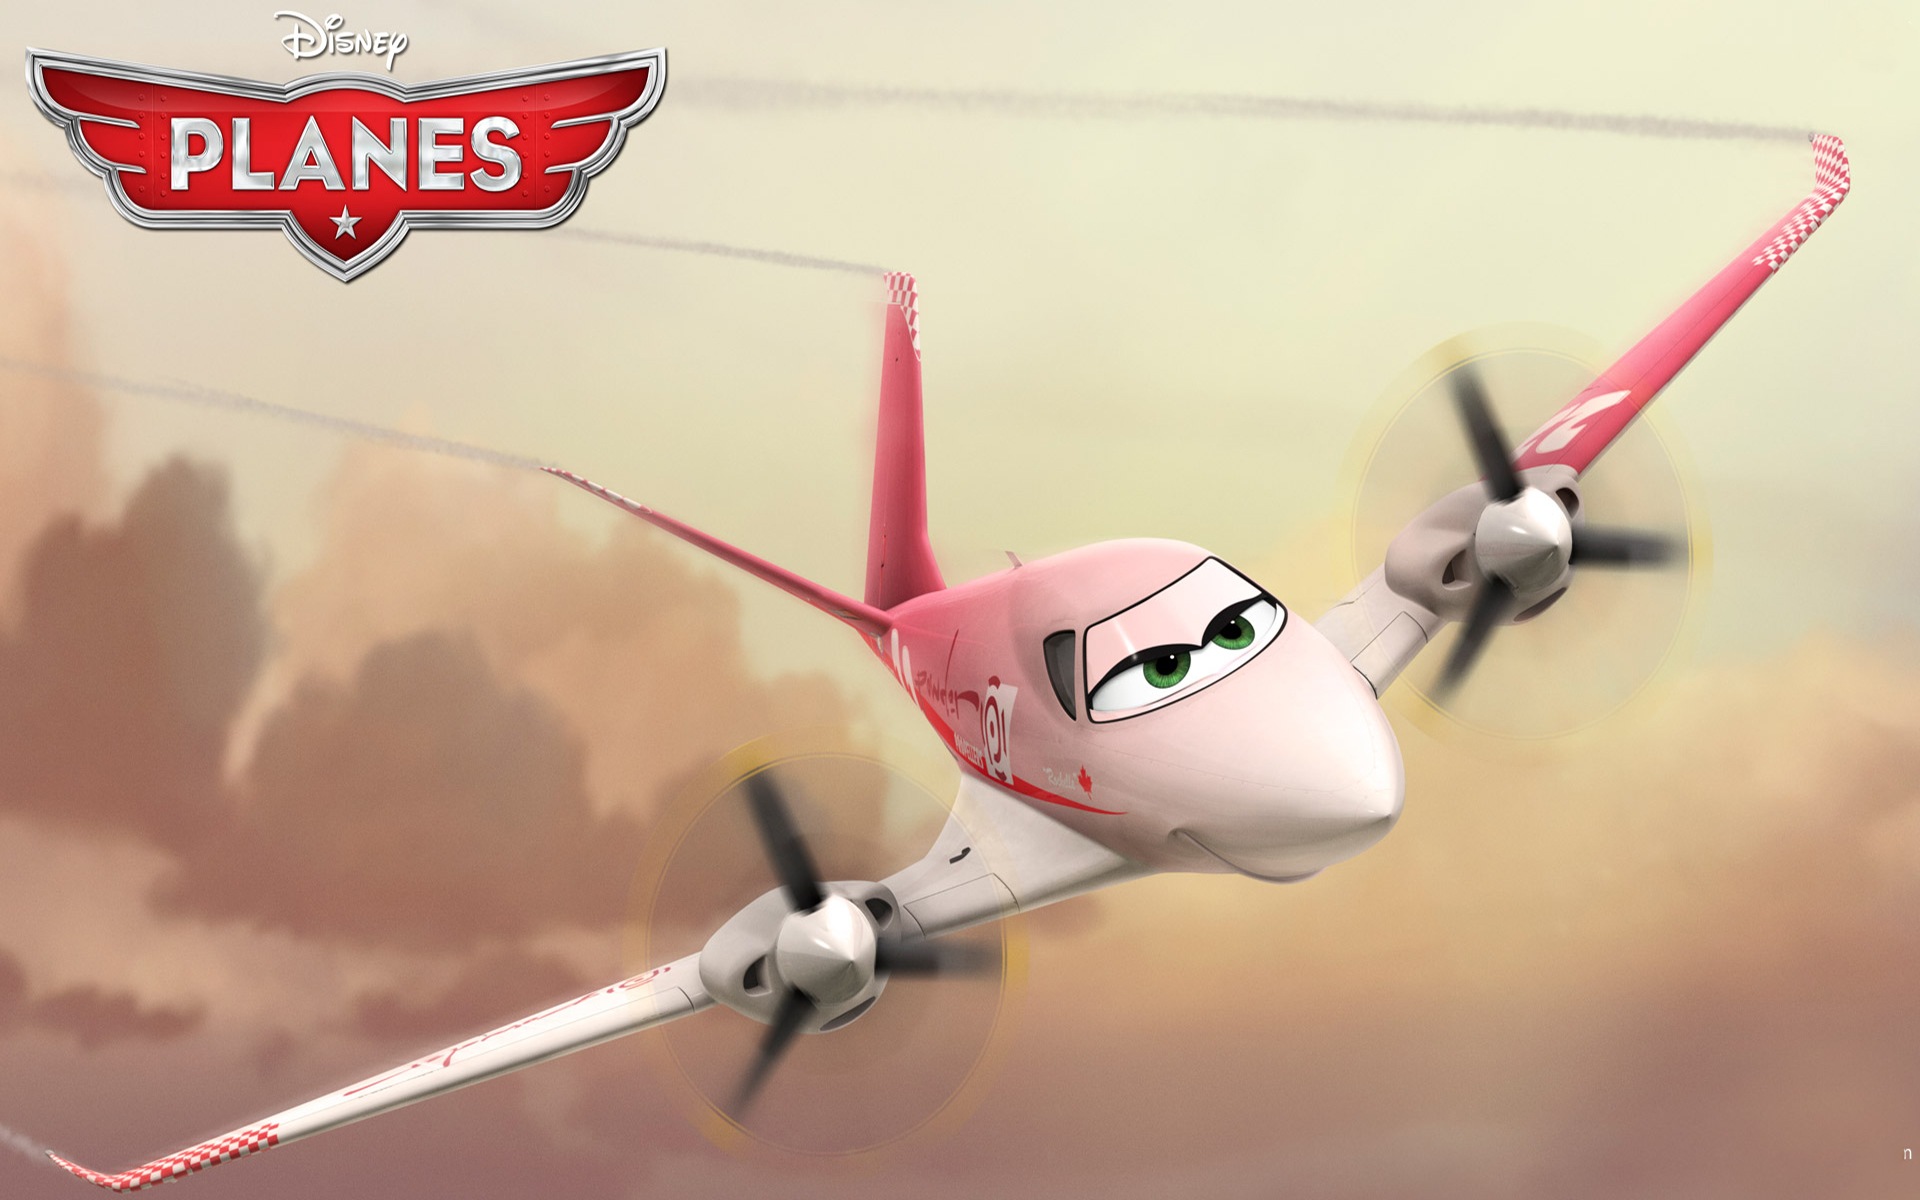 Planes 2013 HD wallpapers #12 - 1920x1200